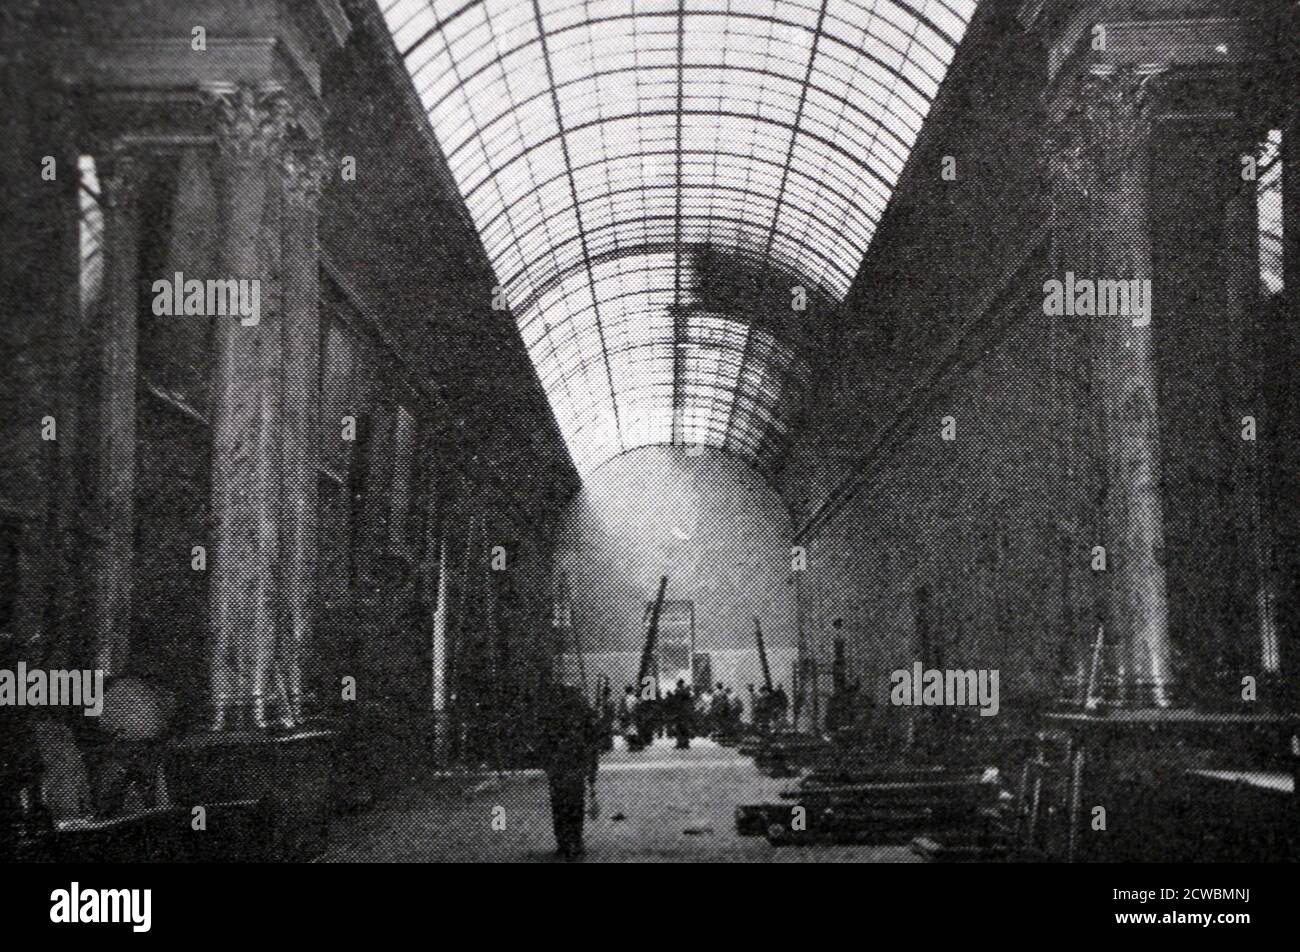 Black and white photograph pertaining to the first days of the war in Paris; inside the large gallery at the Louvre Museum, preparing artworks for protection in case of invasion. Stock Photo